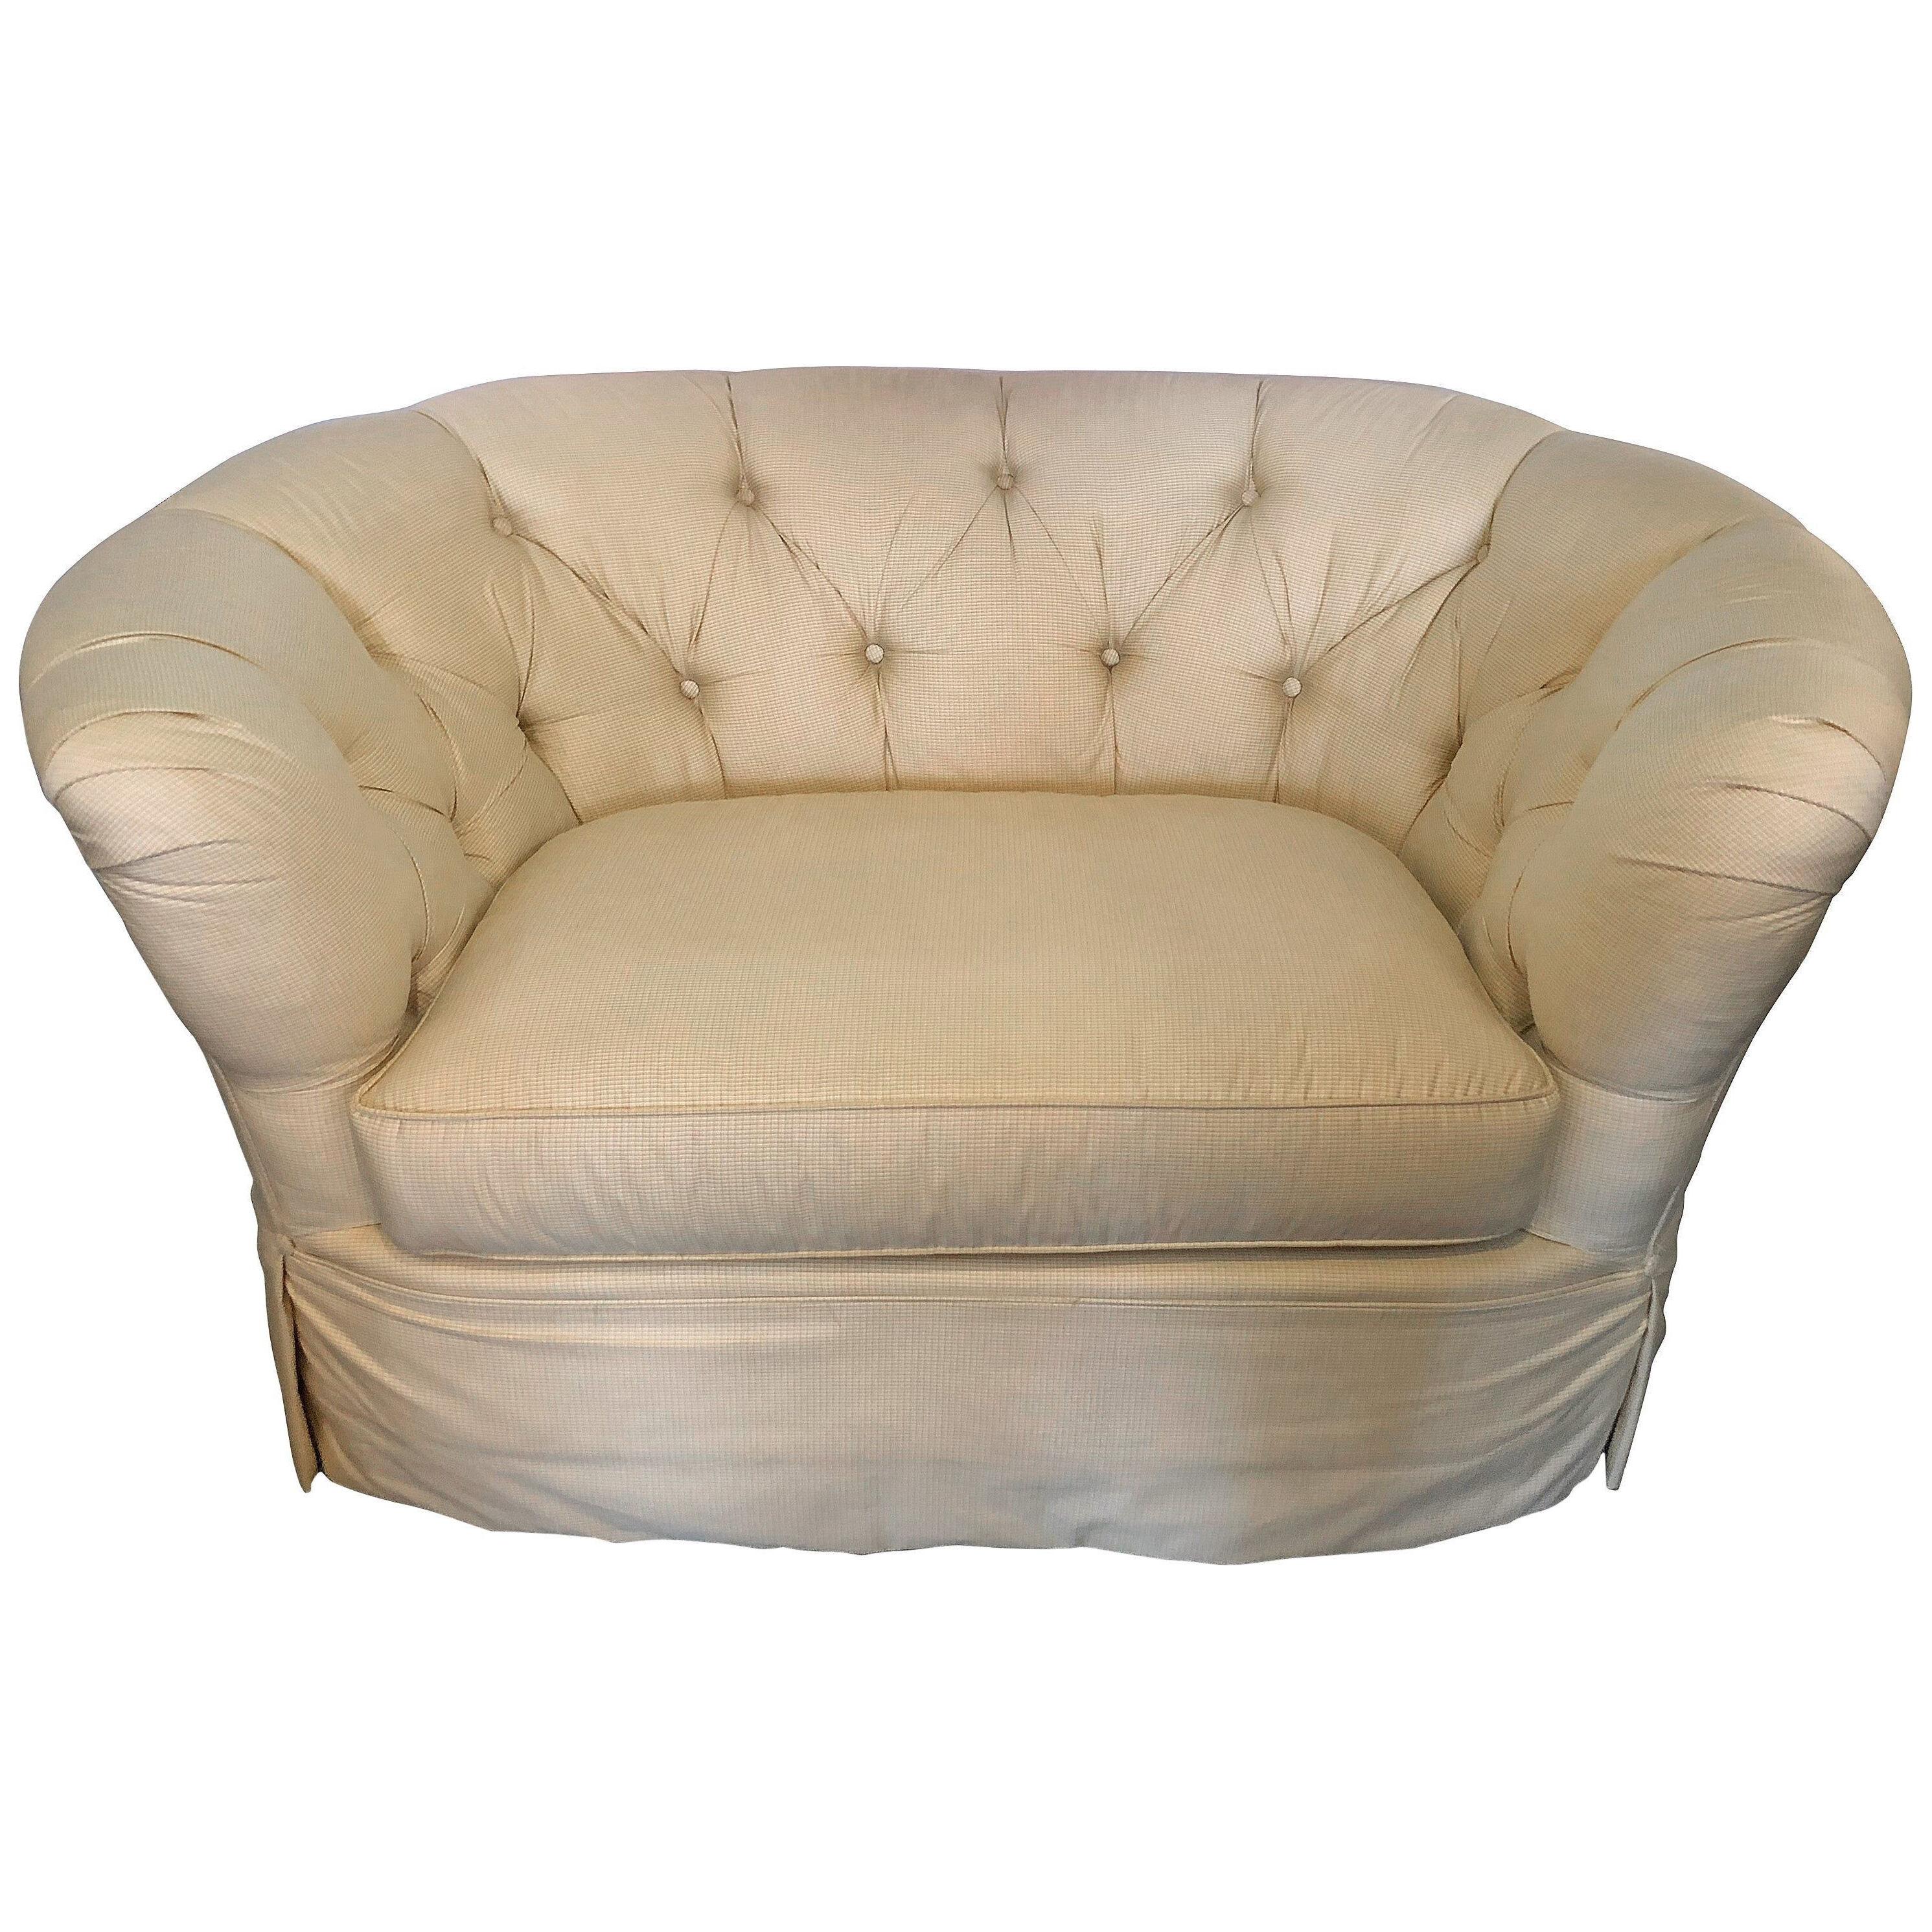 Hollywood Regency Style Tufted Back Loveseat / Settee in a Checkered Fabric